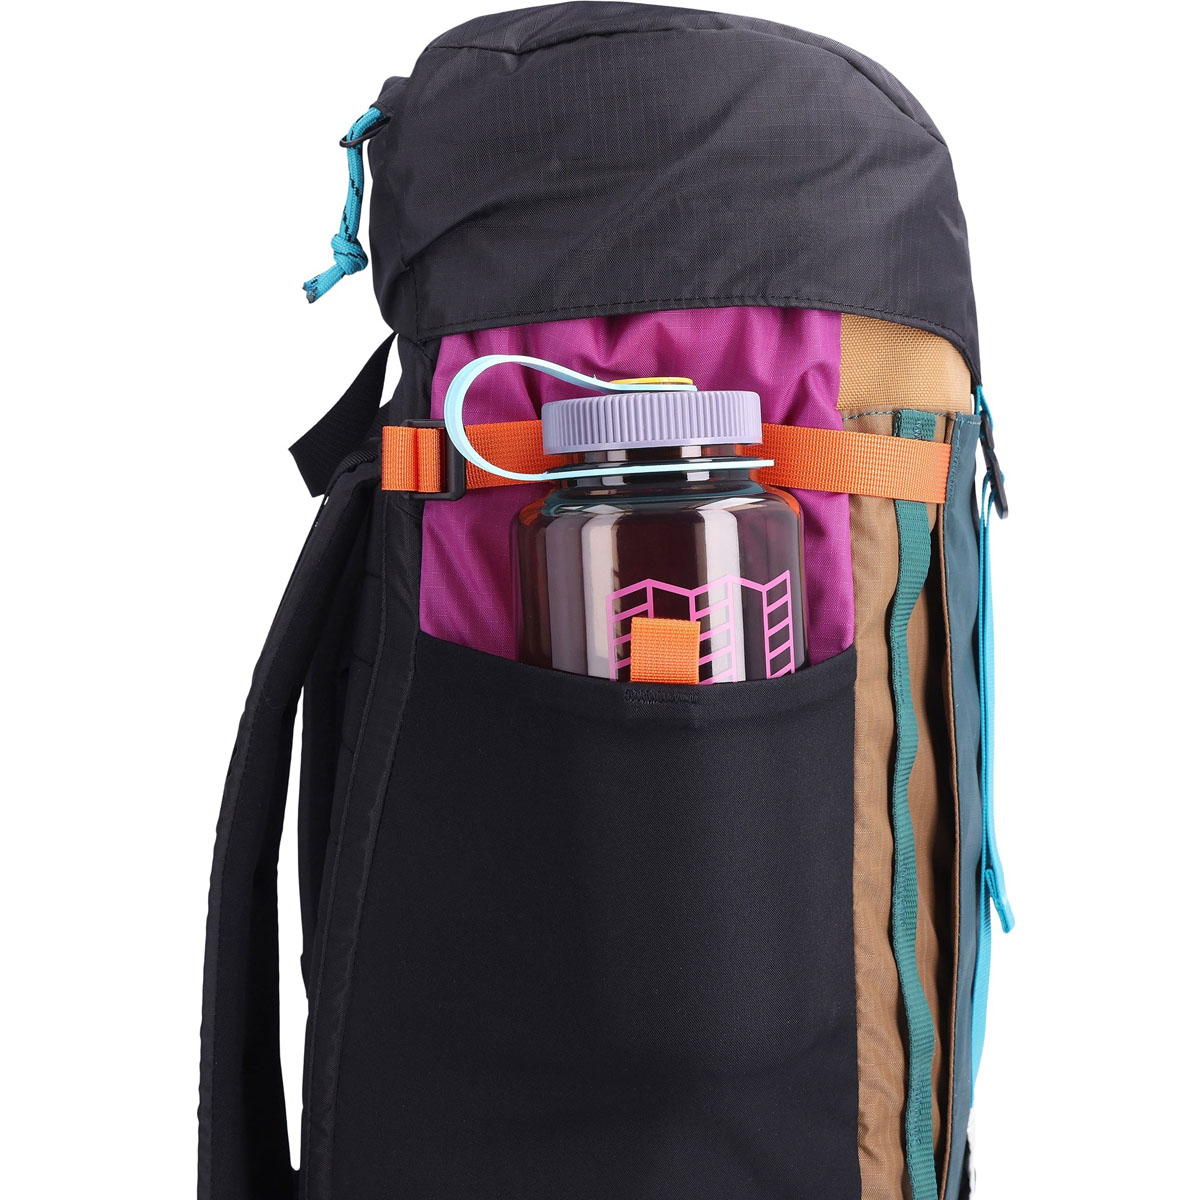 Topo Designs Mountain Pack 16L, side, large side pockets fit a 1 Ltr. water bottle